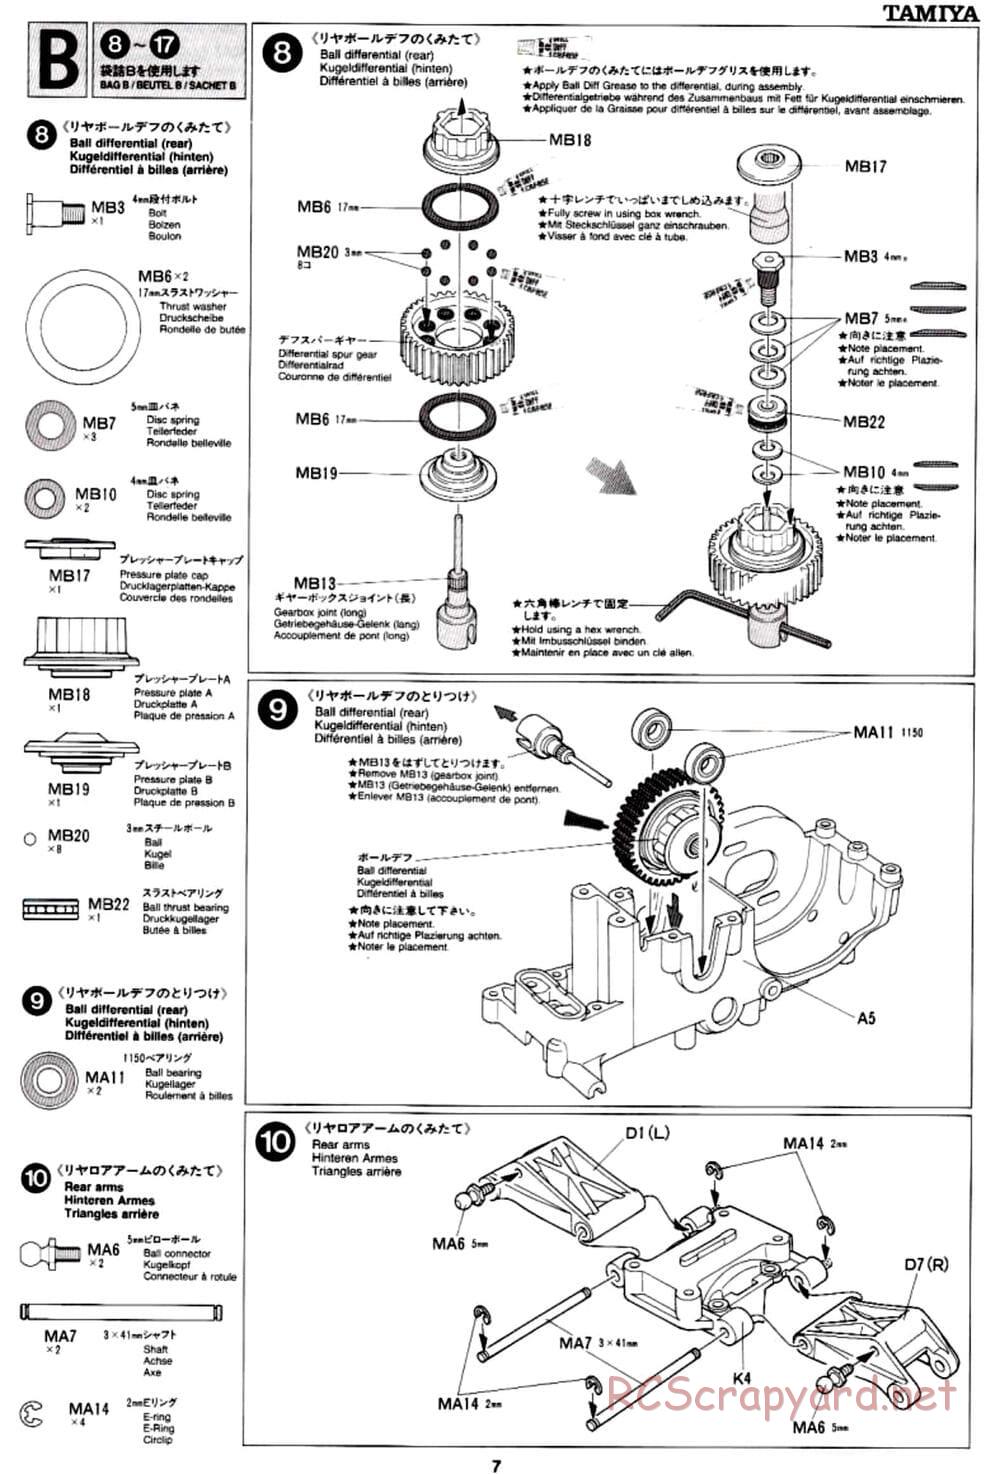 Tamiya - TA-03R TRF Special Edition Chassis - Manual - Page 7